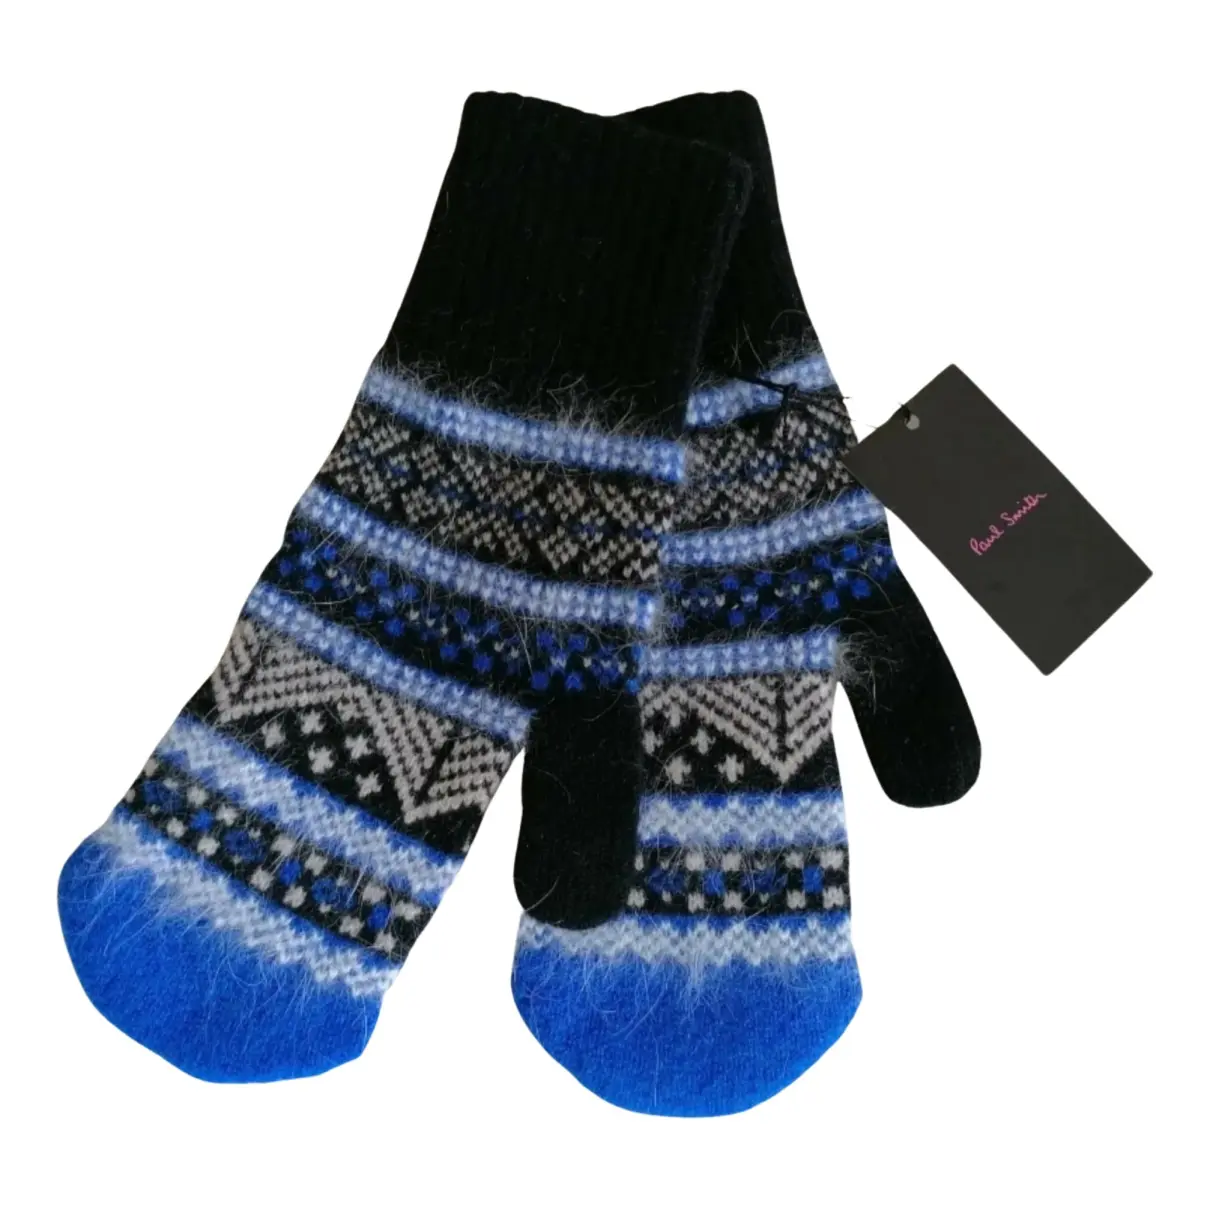 Wool mittens Paul Smith